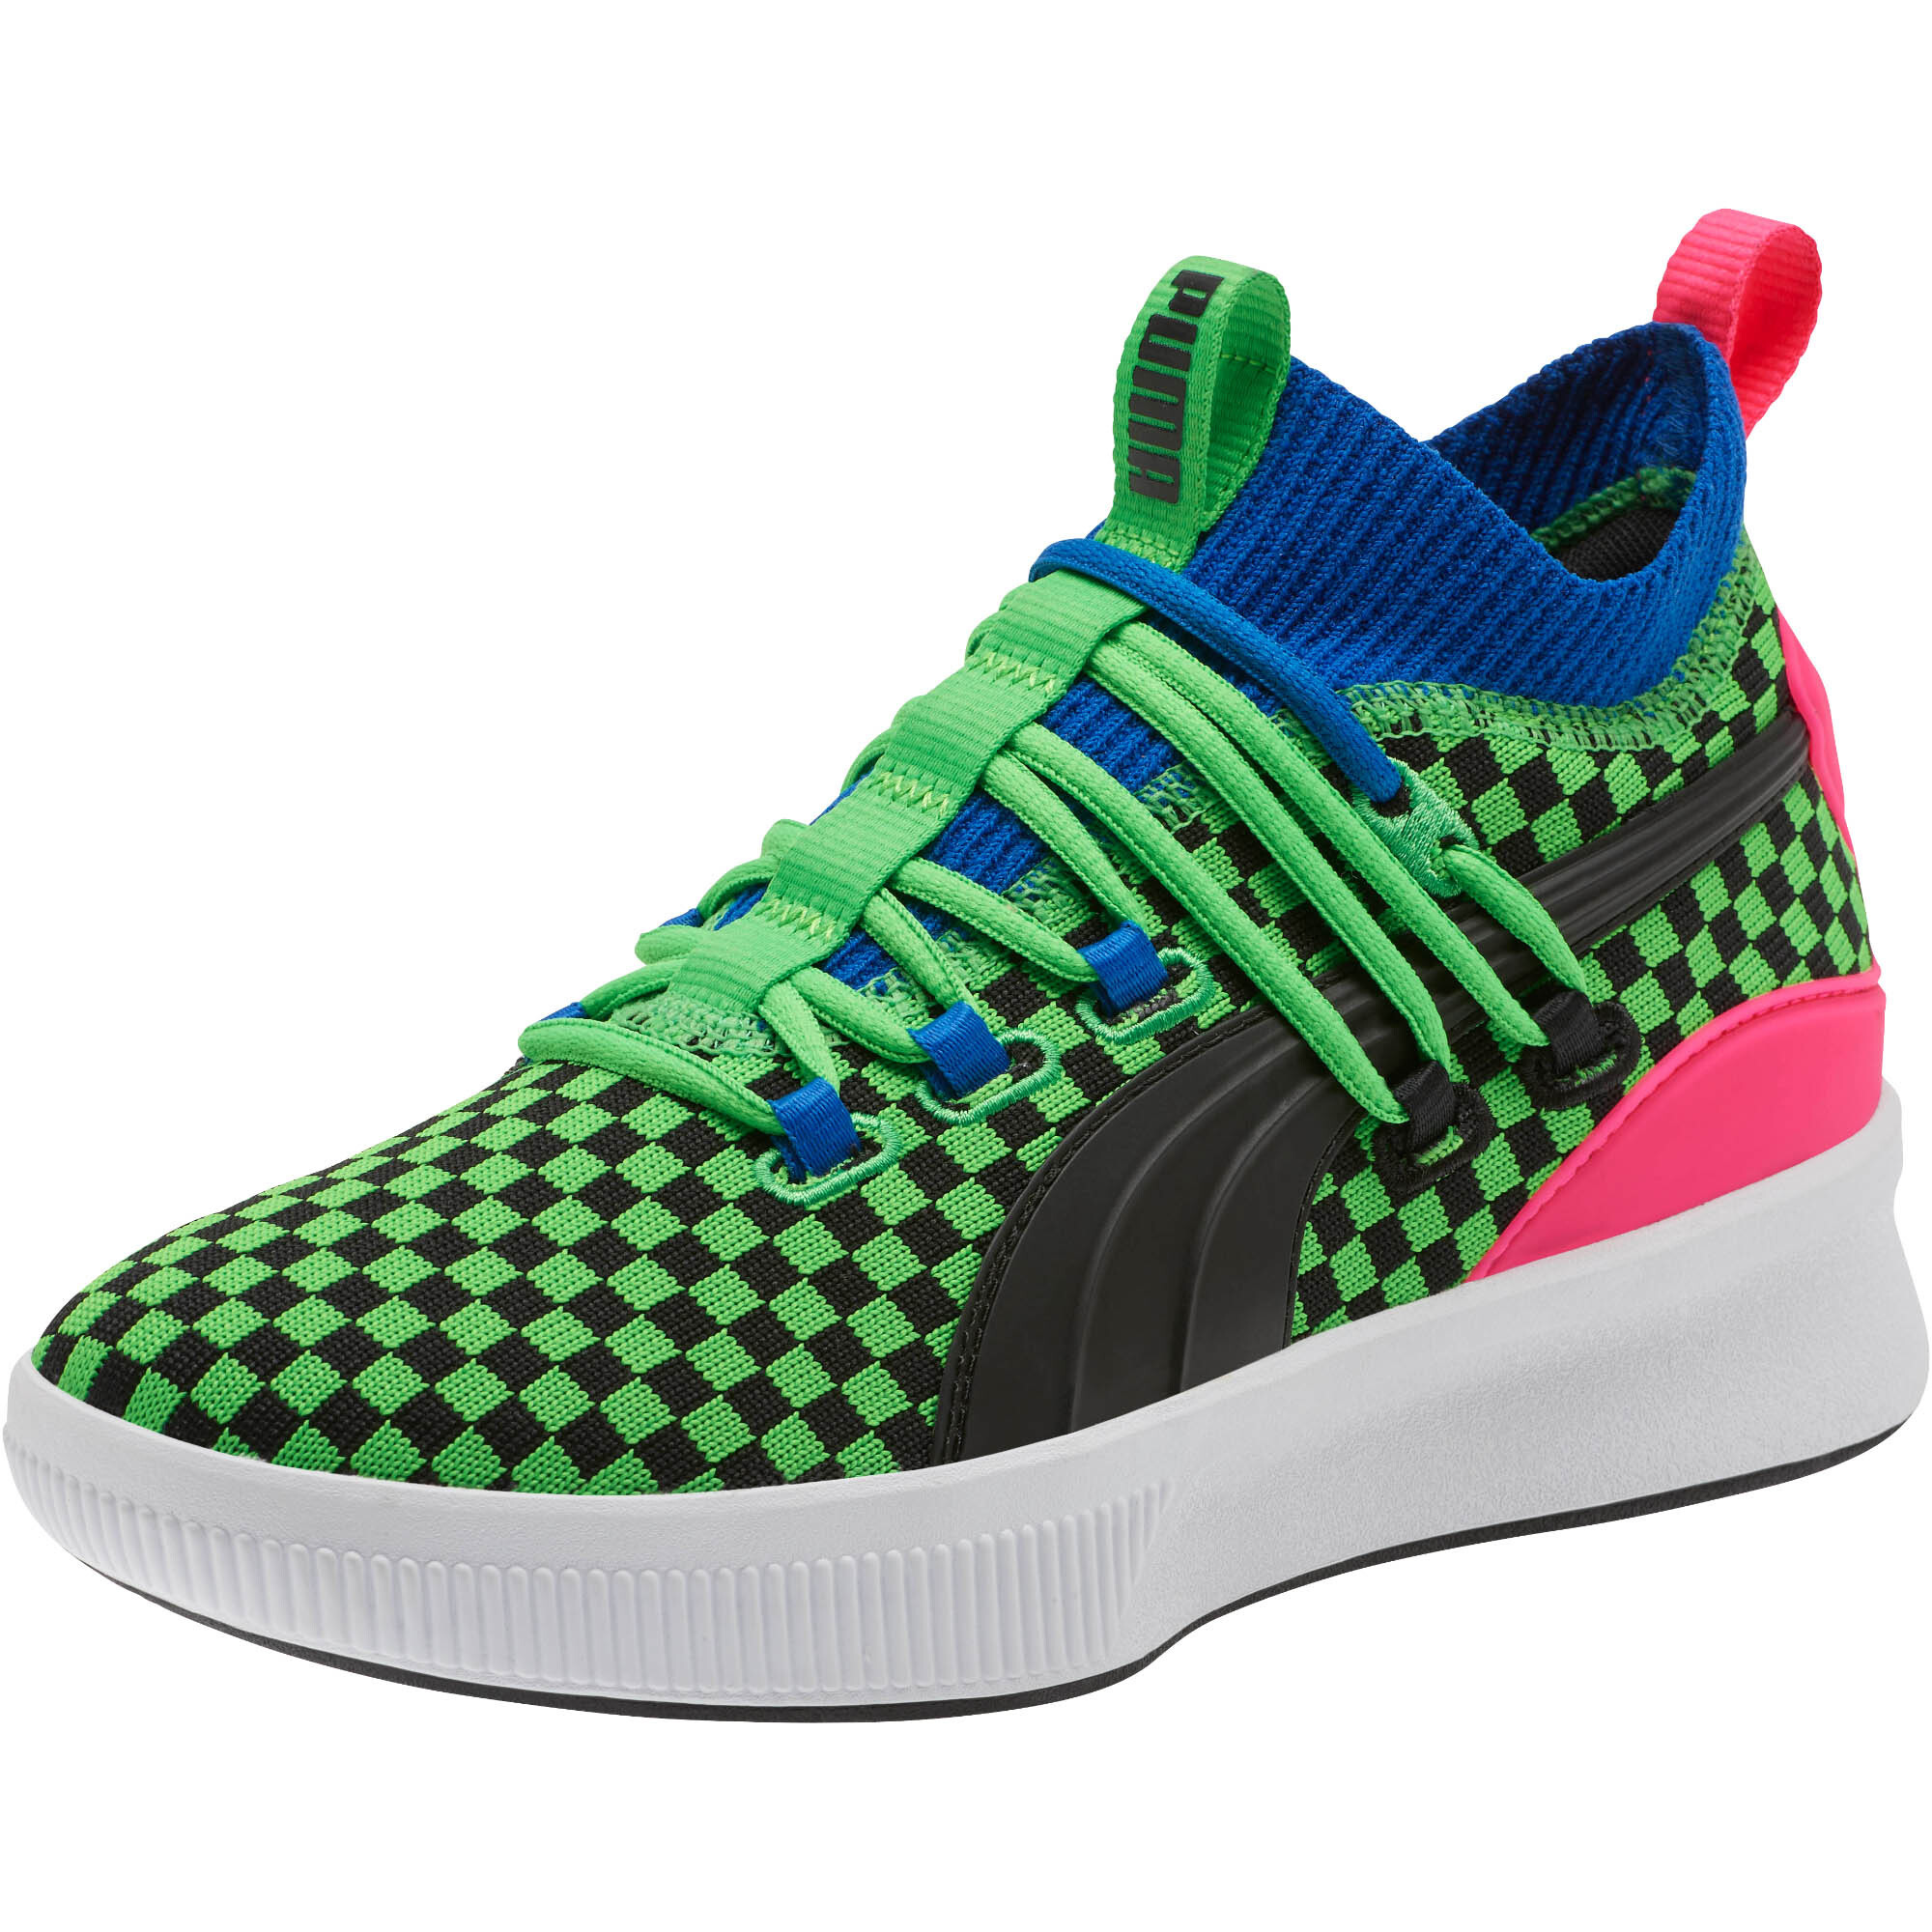 PUMA Youth Clyde Court Summertime Basketball Shoes | eBay